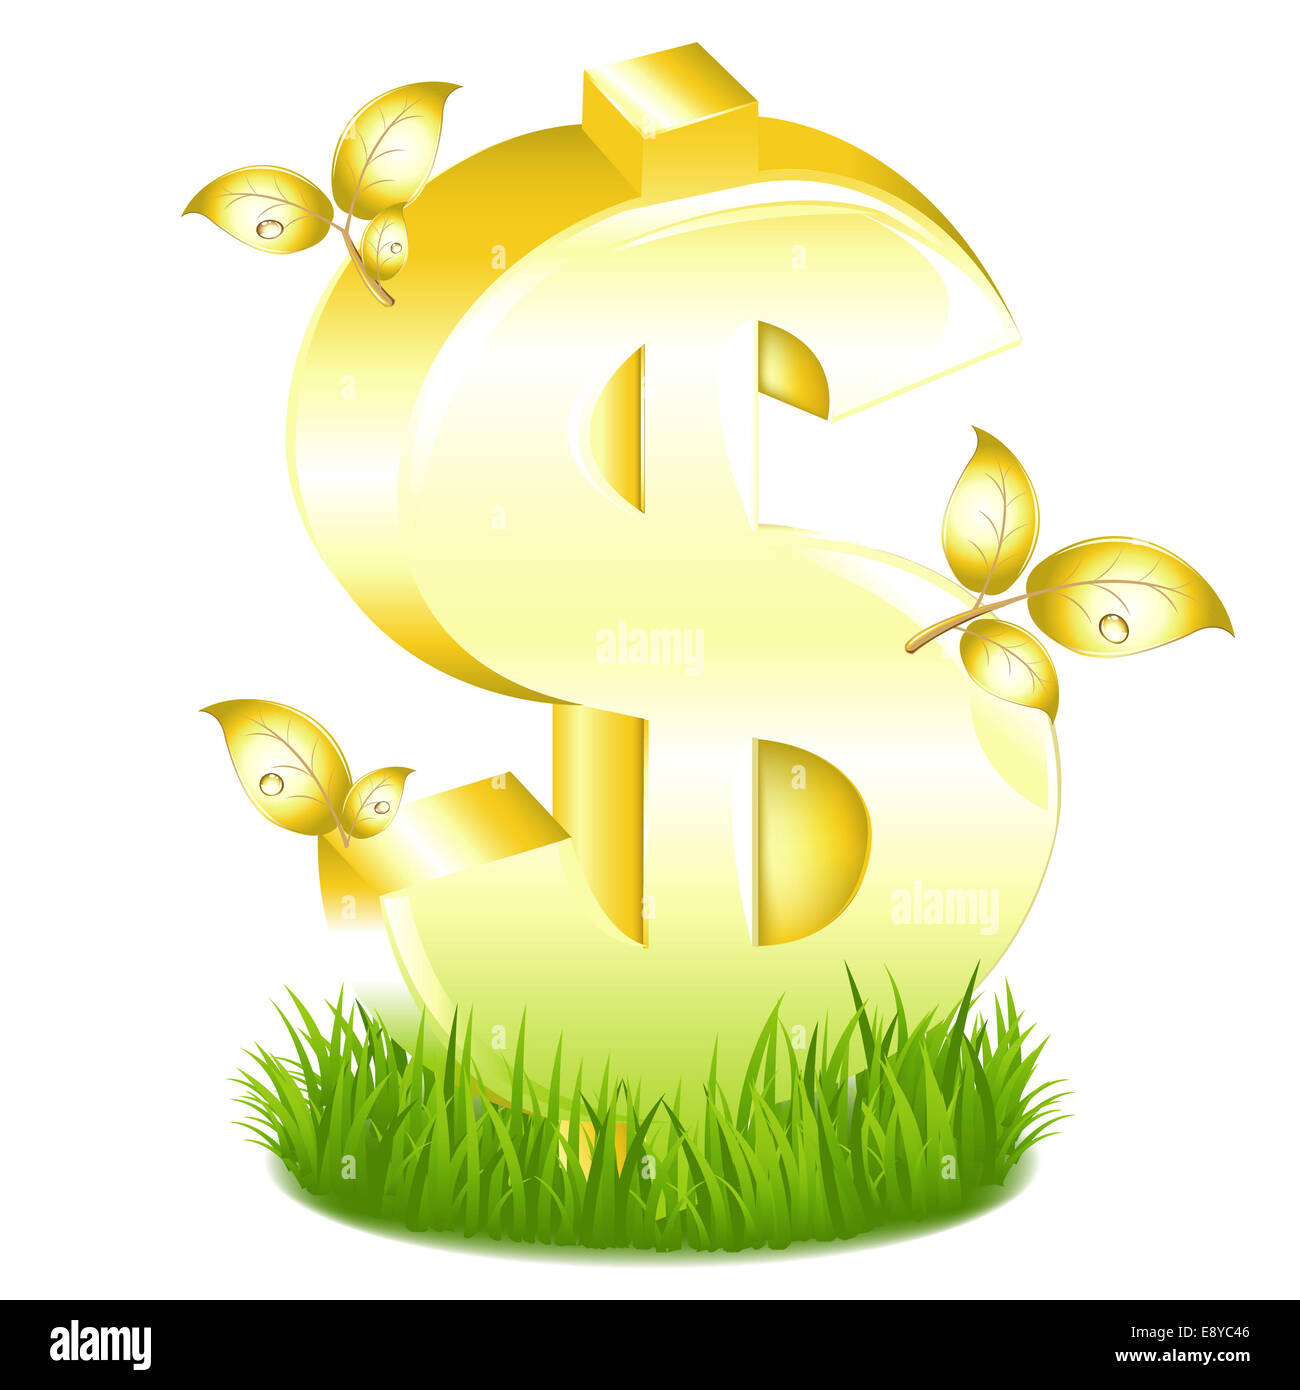 Golden Dollar Sign With Leaves In Grass Stock Photo